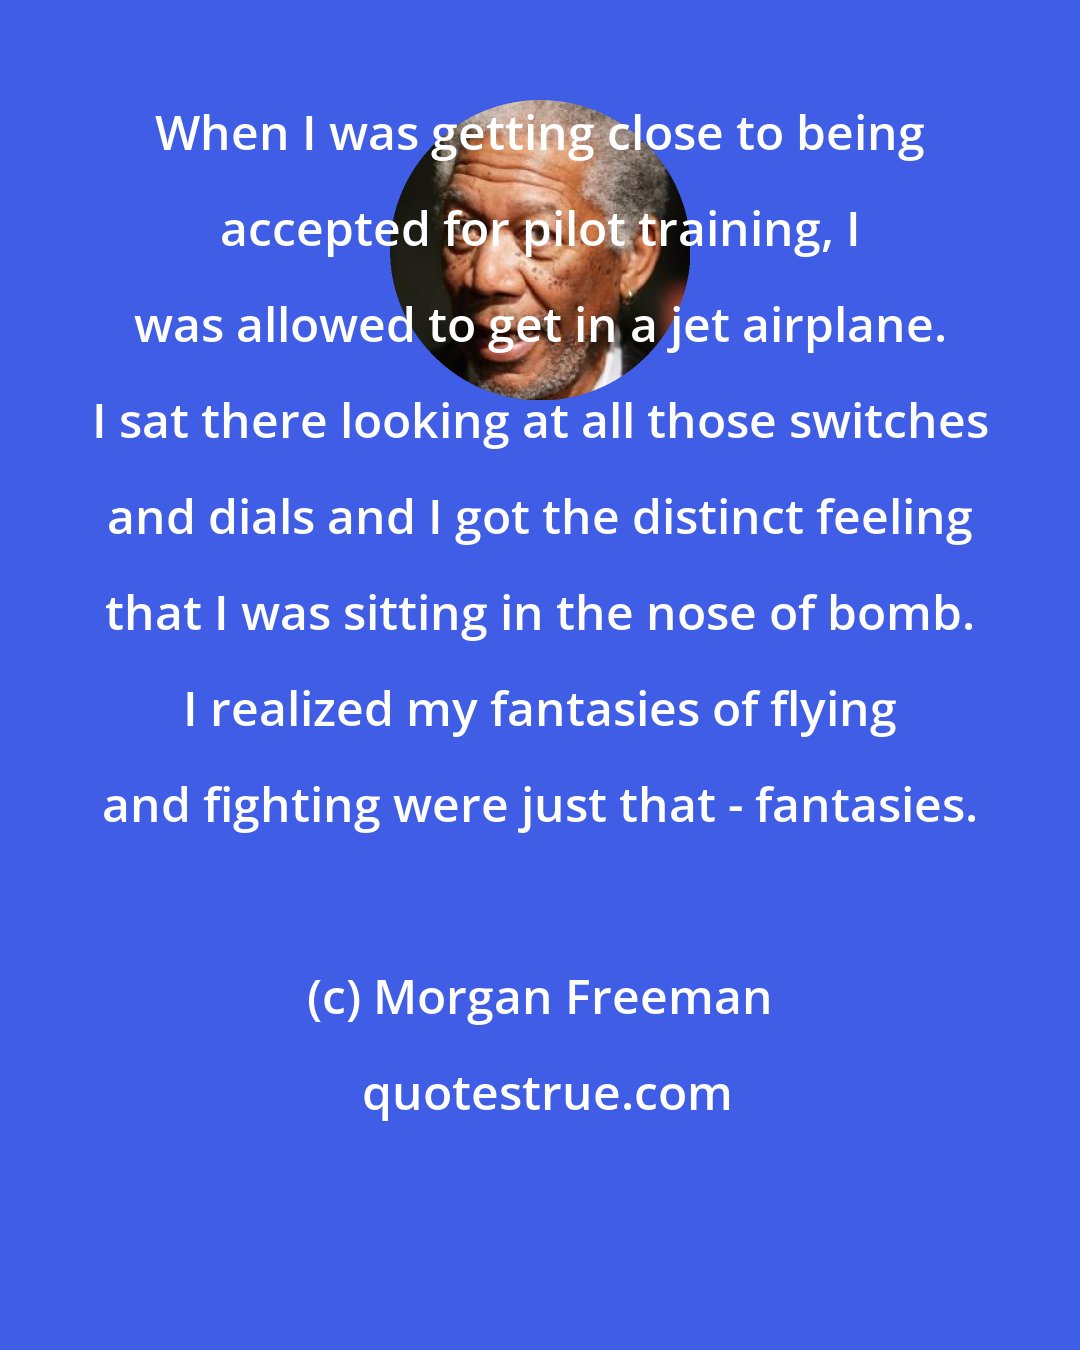 Morgan Freeman: When I was getting close to being accepted for pilot training, I was allowed to get in a jet airplane. I sat there looking at all those switches and dials and I got the distinct feeling that I was sitting in the nose of bomb. I realized my fantasies of flying and fighting were just that - fantasies.